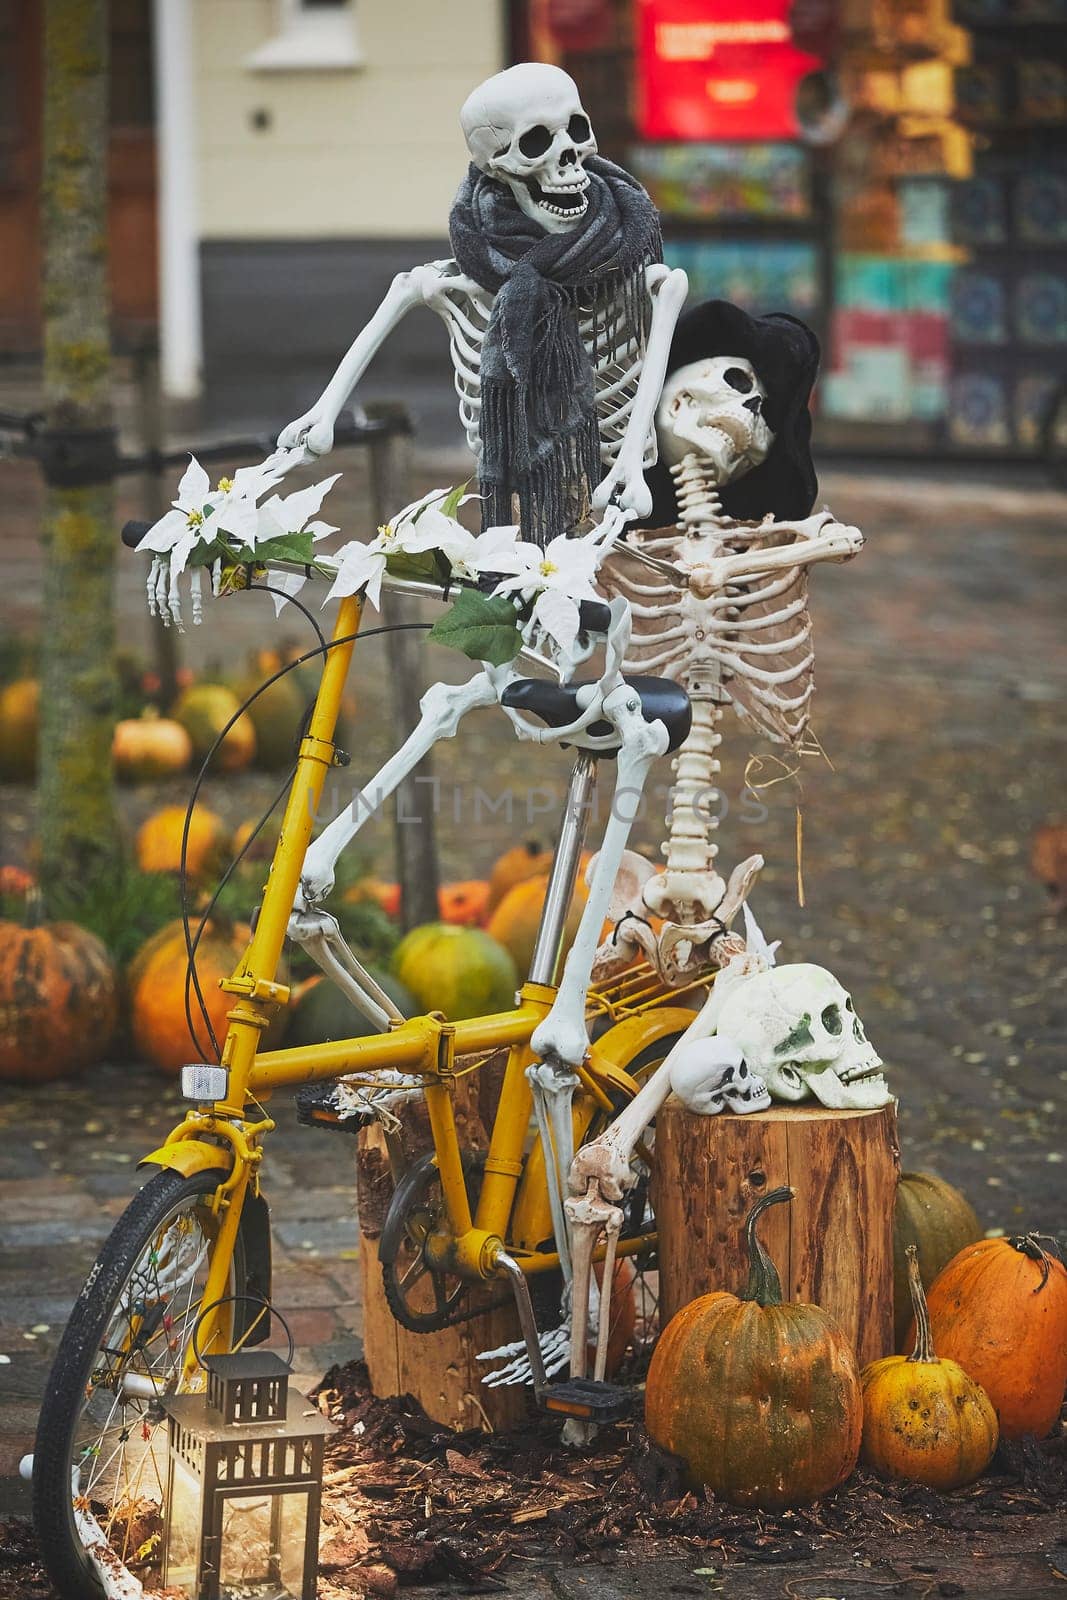 Funny skeletons on a bicycle on Halloween in Denmark.